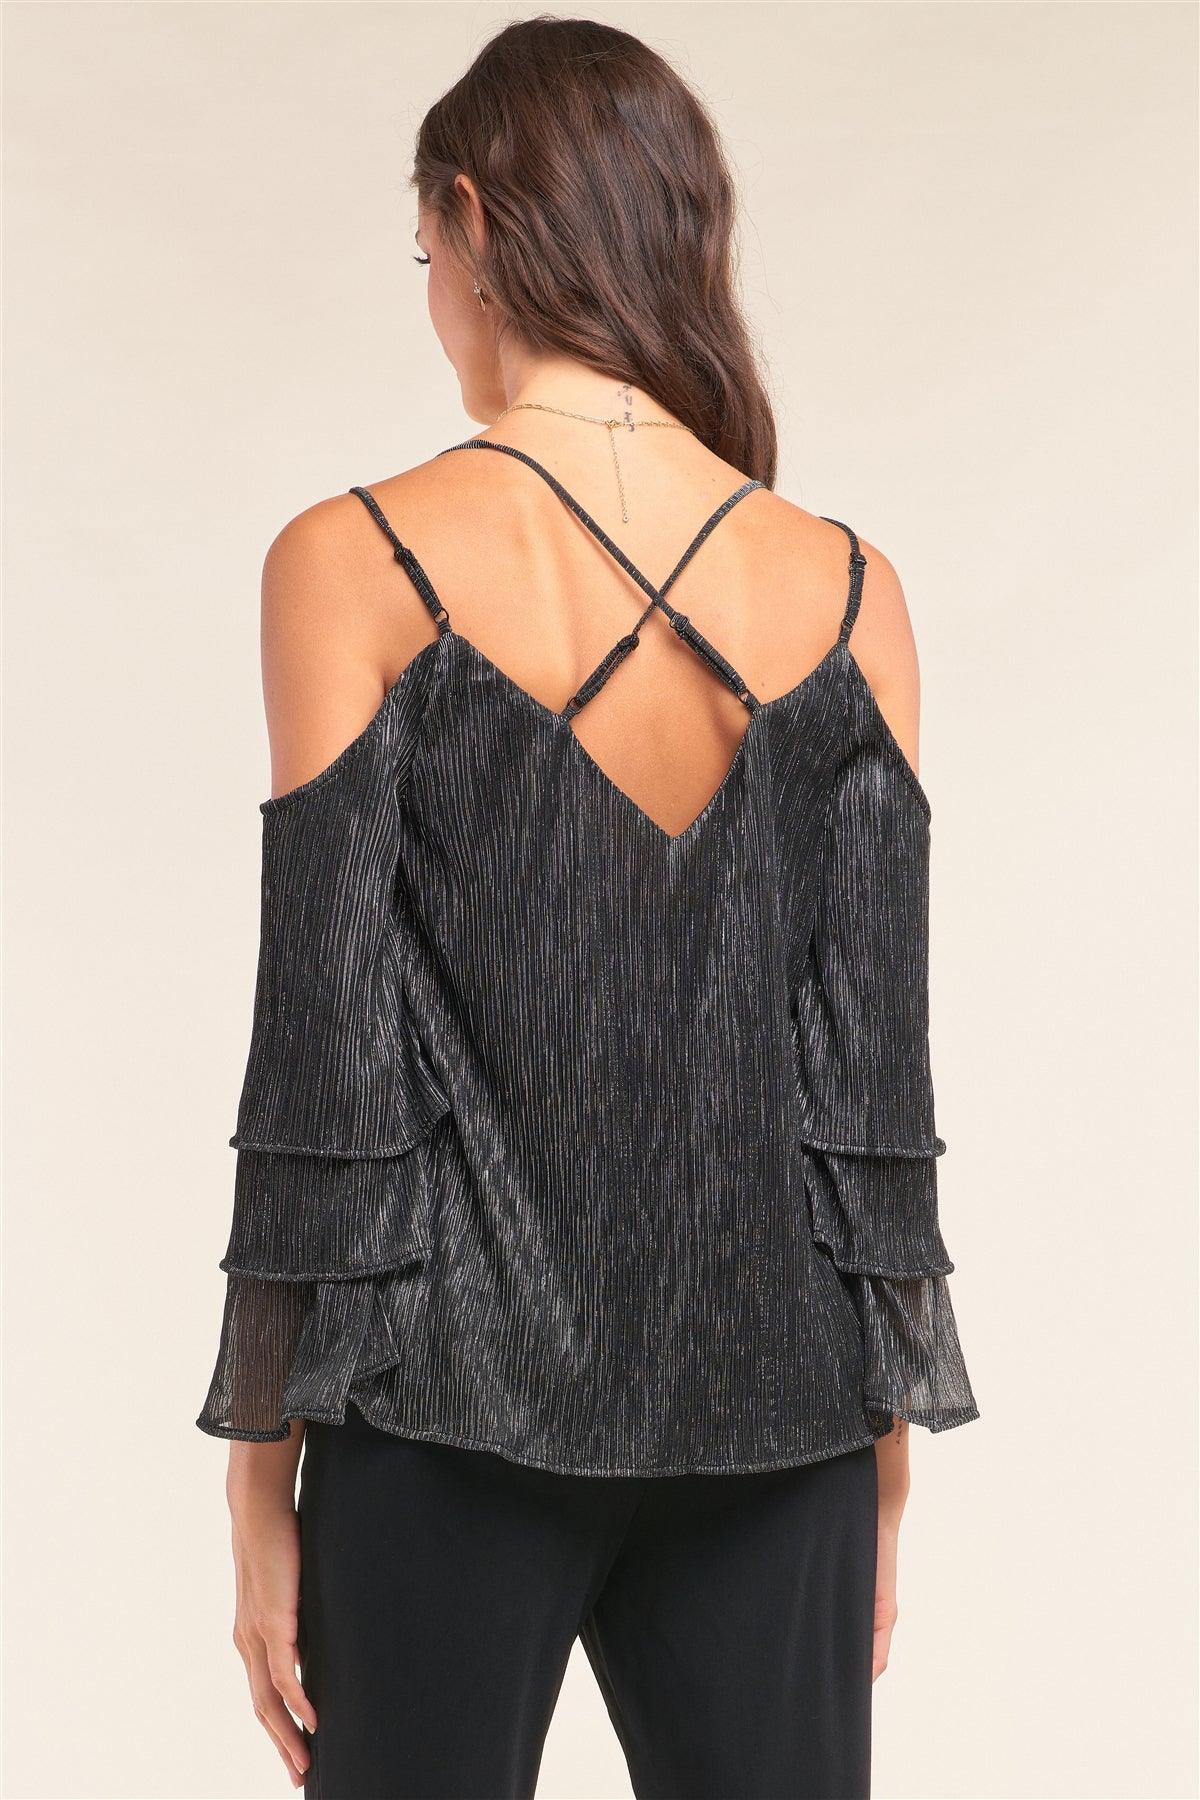 Silver Lining Shimmer Mesh Off-The-Shoulder Long Layered Sleeve Relaxed Fit V-Neck Crisscross Back Top /2-3